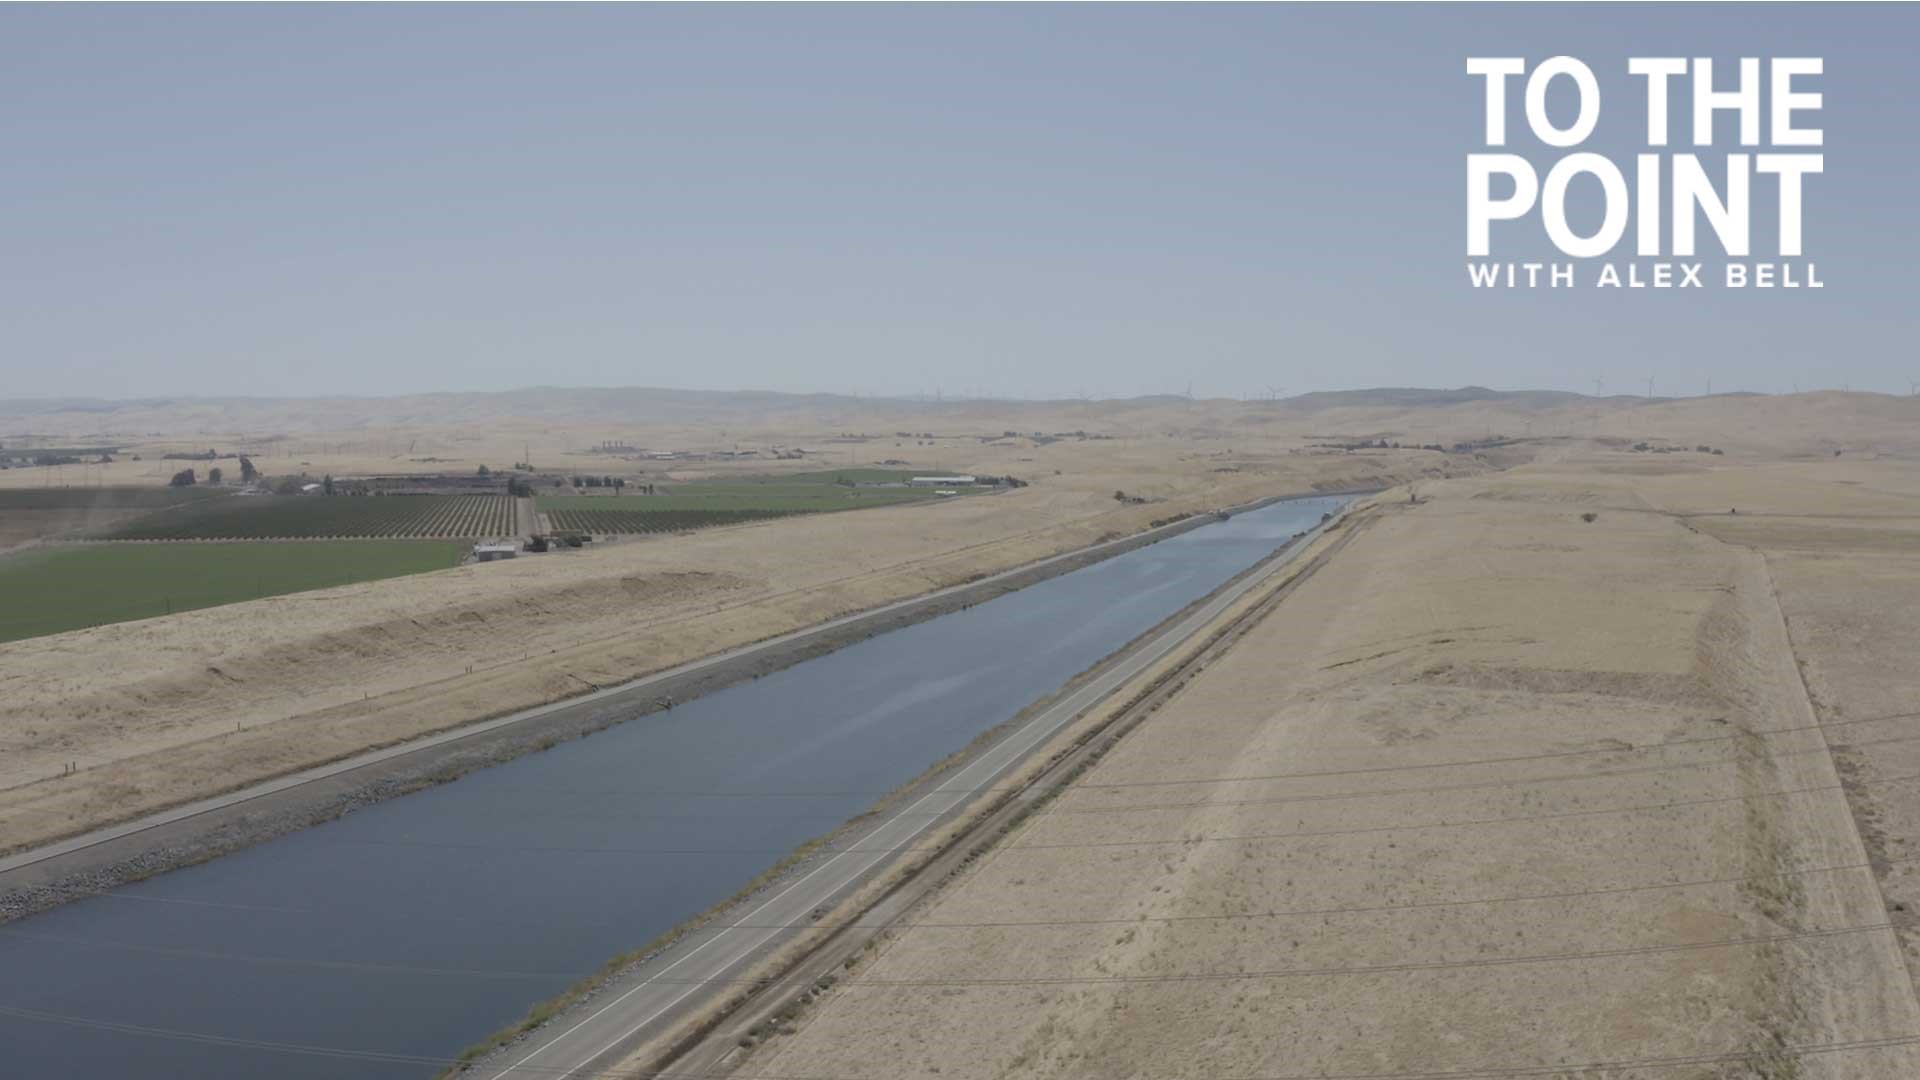 California Department of Water Resources faces another lawsuit regarding controversial Delta water tunnel project